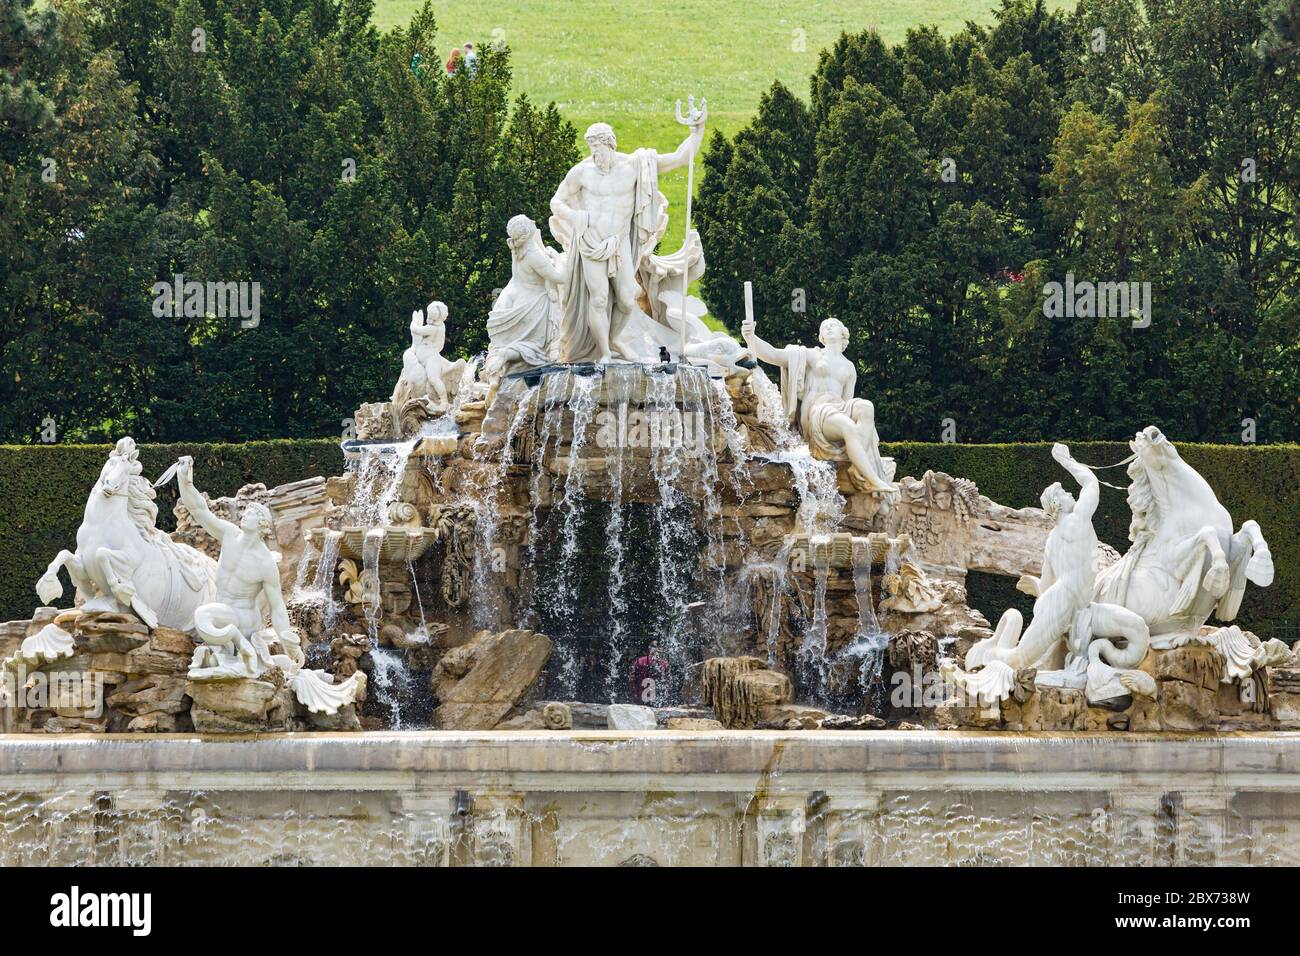 View to the large neptune fountain with statues in the Schoenbrunn Palace park in Vienna, Austria. Stock Photo